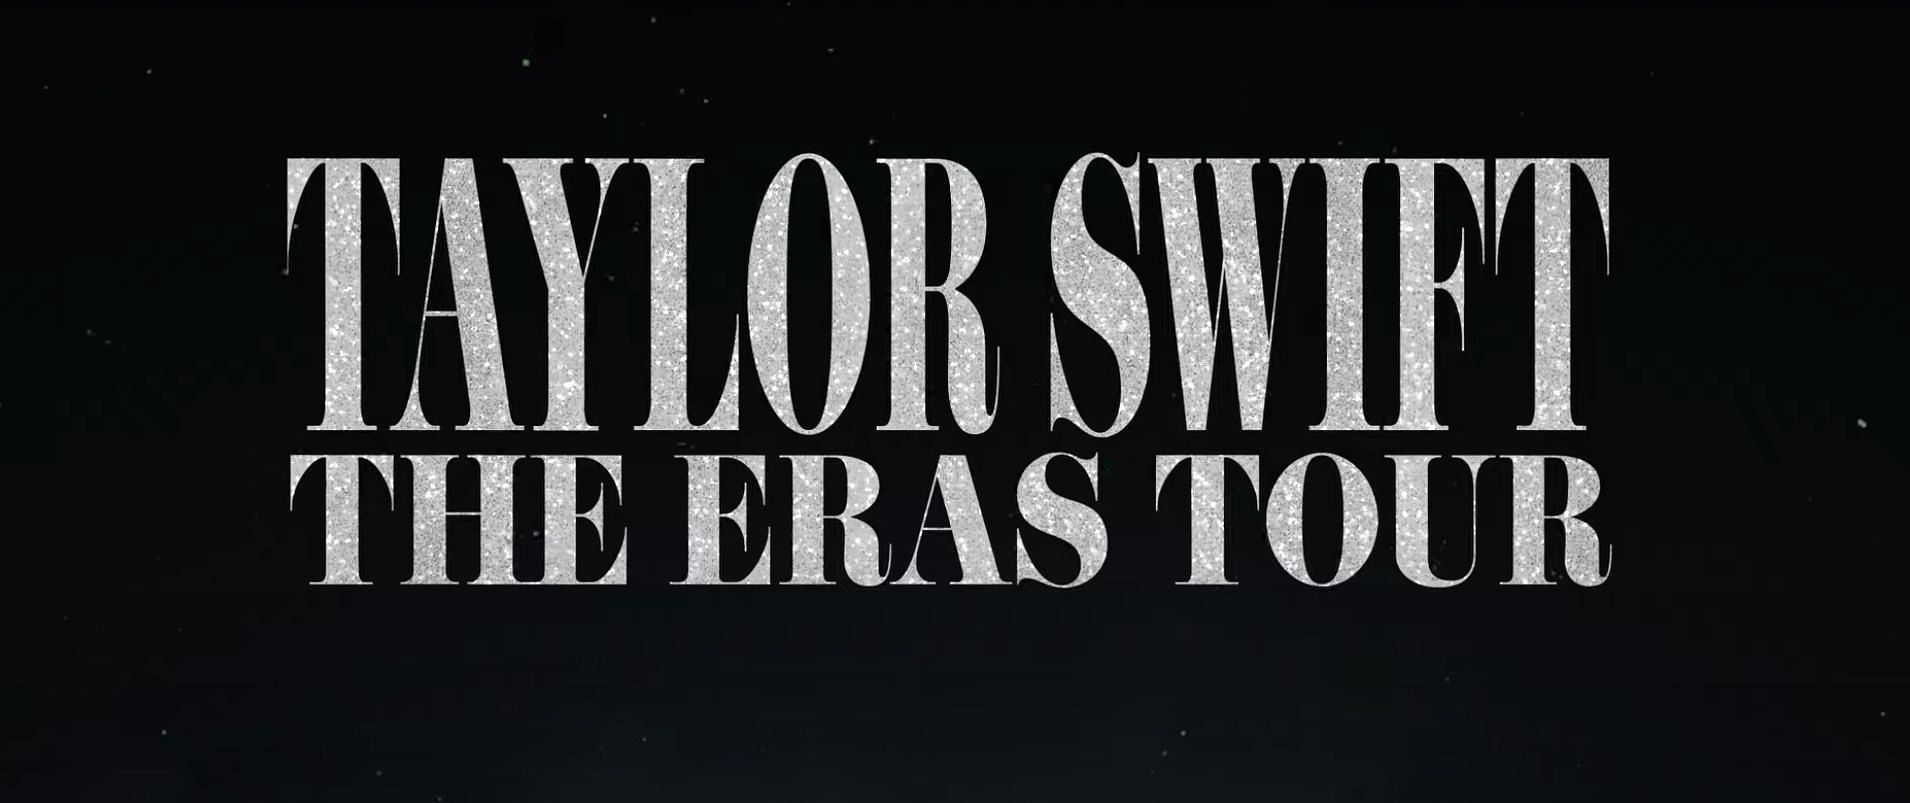 A shot from the trailer (Image via Taylor Swift | The Eras Tour)